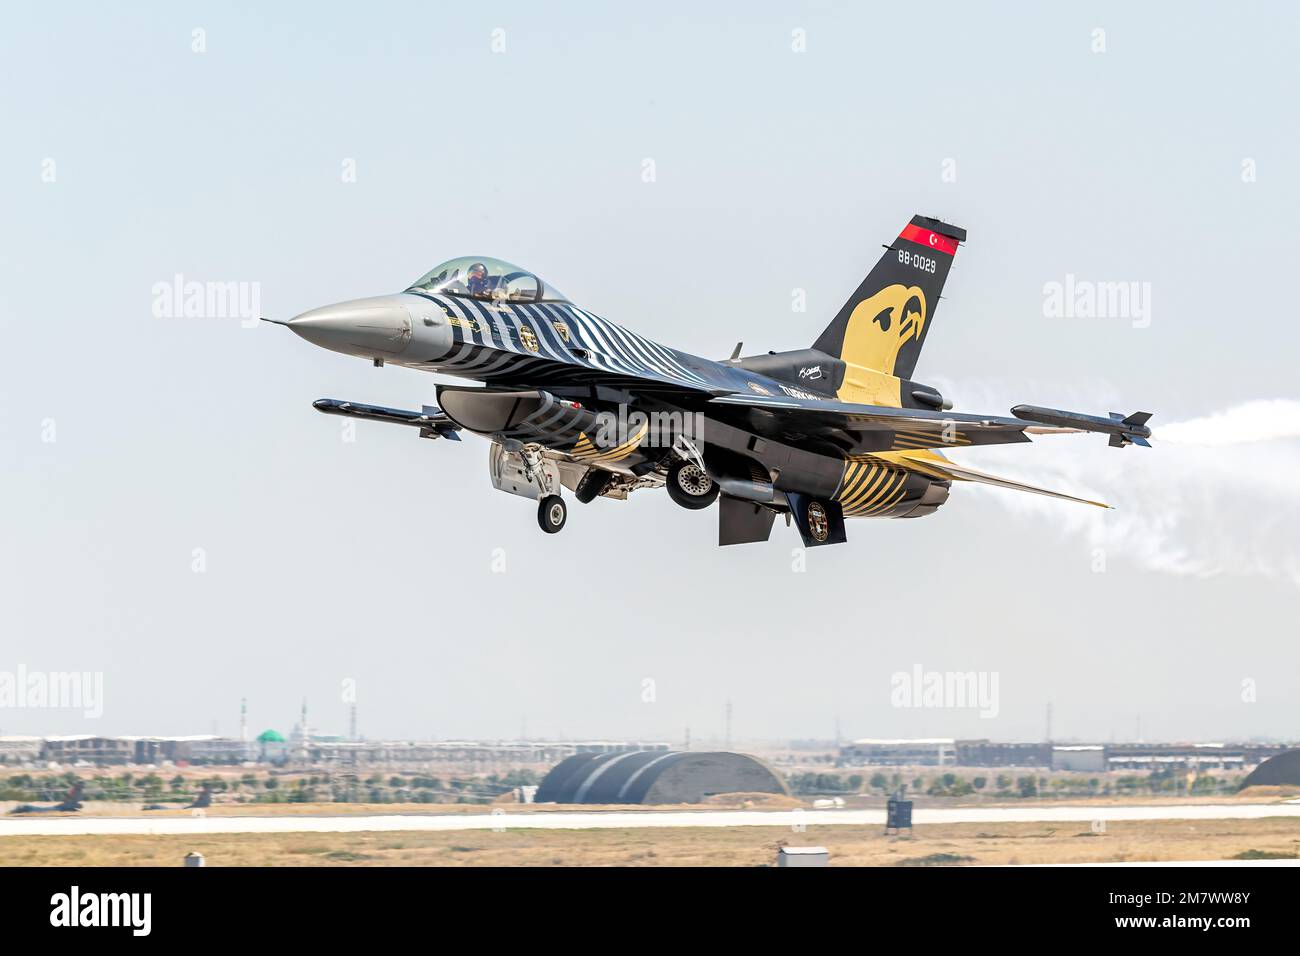 Konya, Turkey - 07 01 2021: Anatolian Eagle Air Force Exercise 2021 Soloturk F16 Fighter jet n take-off position in Turkey Stock Photo